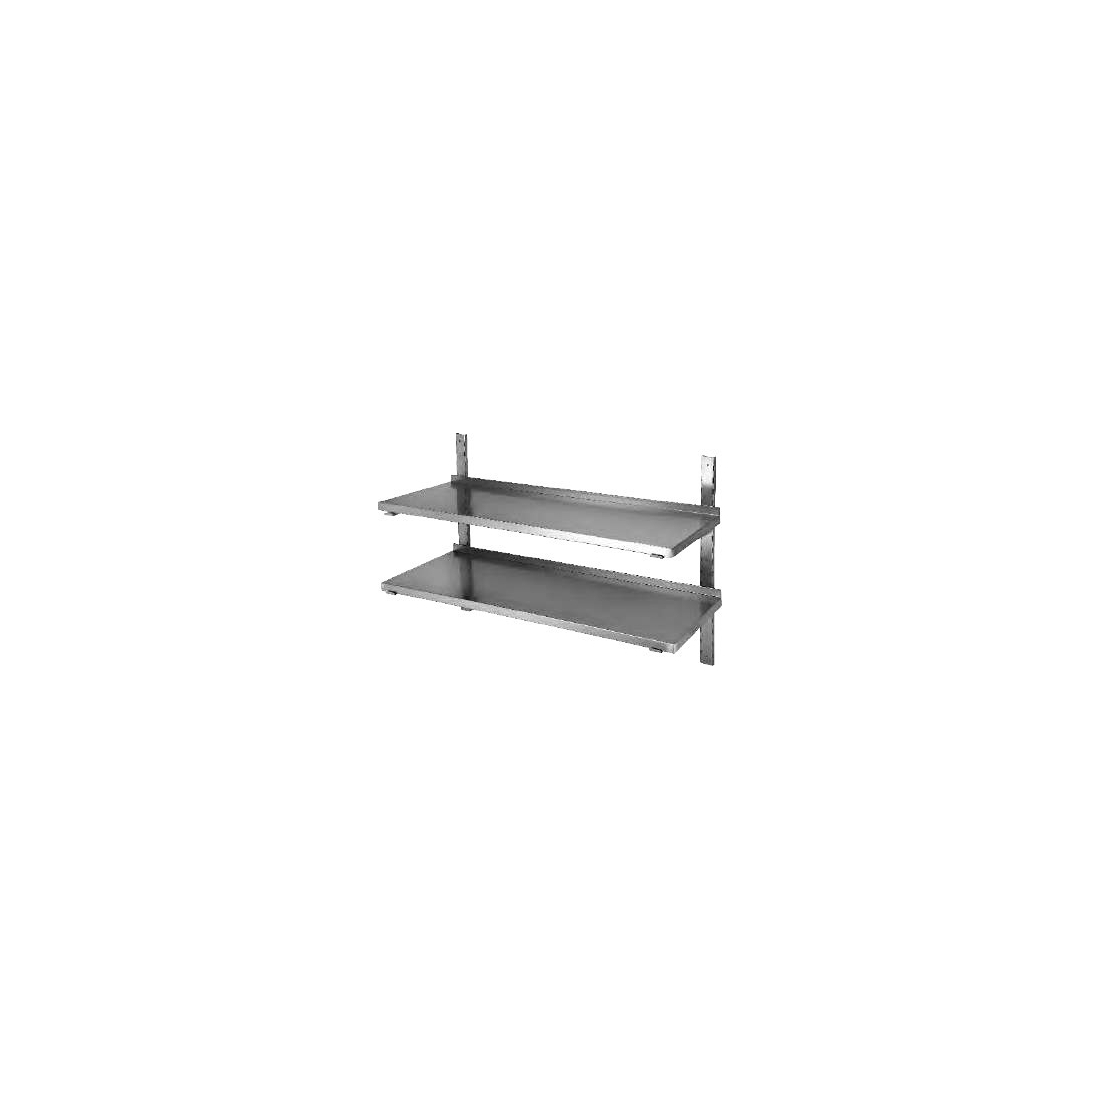 Stainless Steel Wall Shelf double 1m (WBD10030)